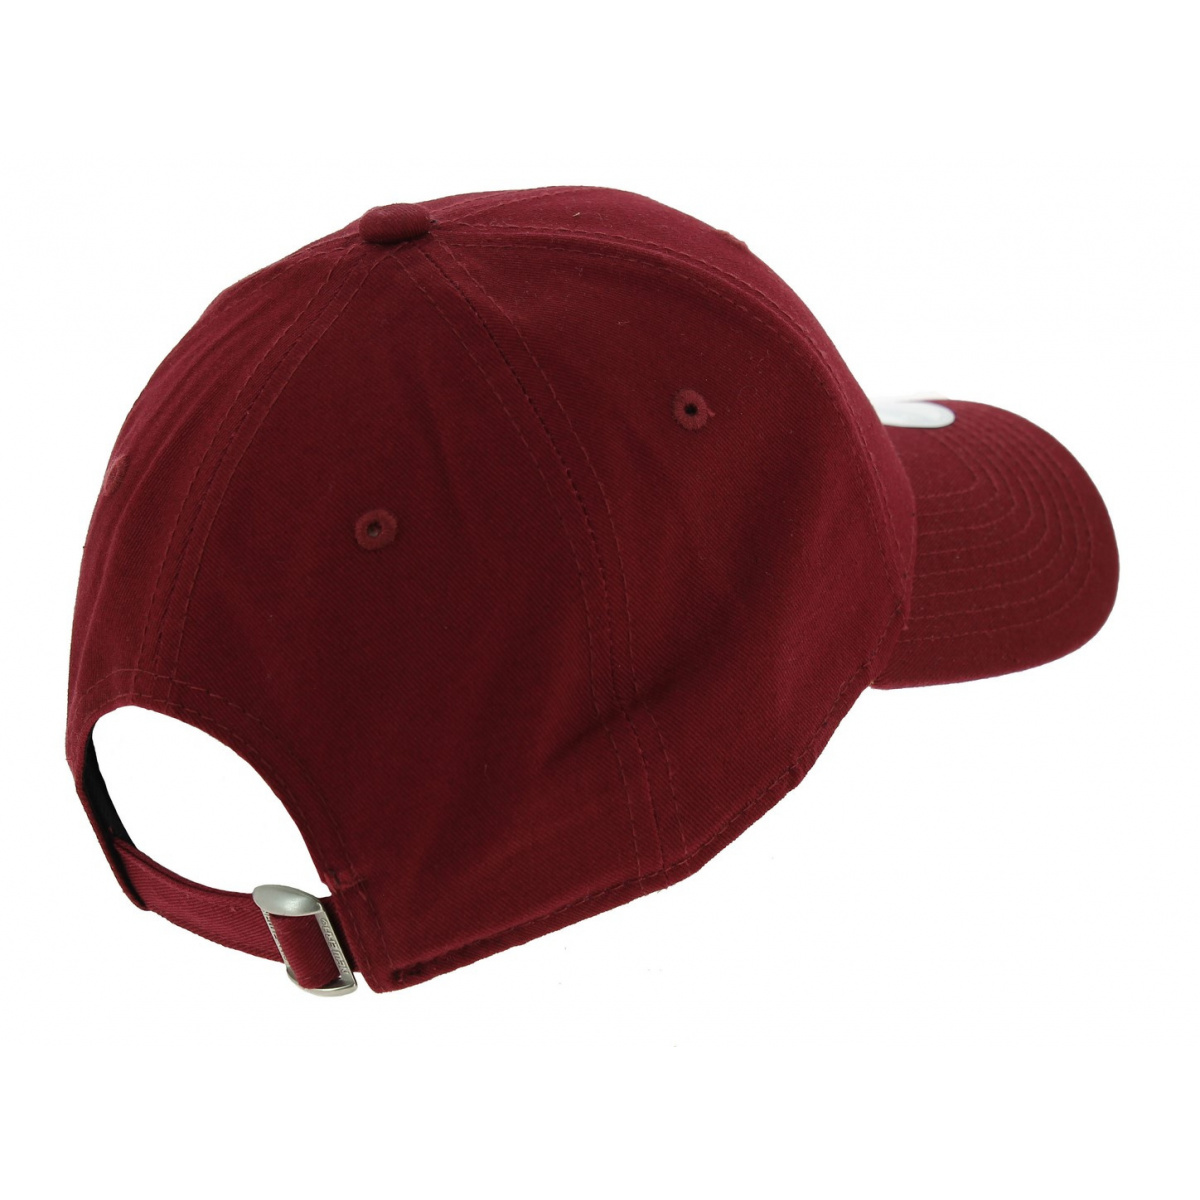 Baseball Cap Essential 940 NY Bordeaux - New Era Reference : 7716 |  Chapellerie Traclet